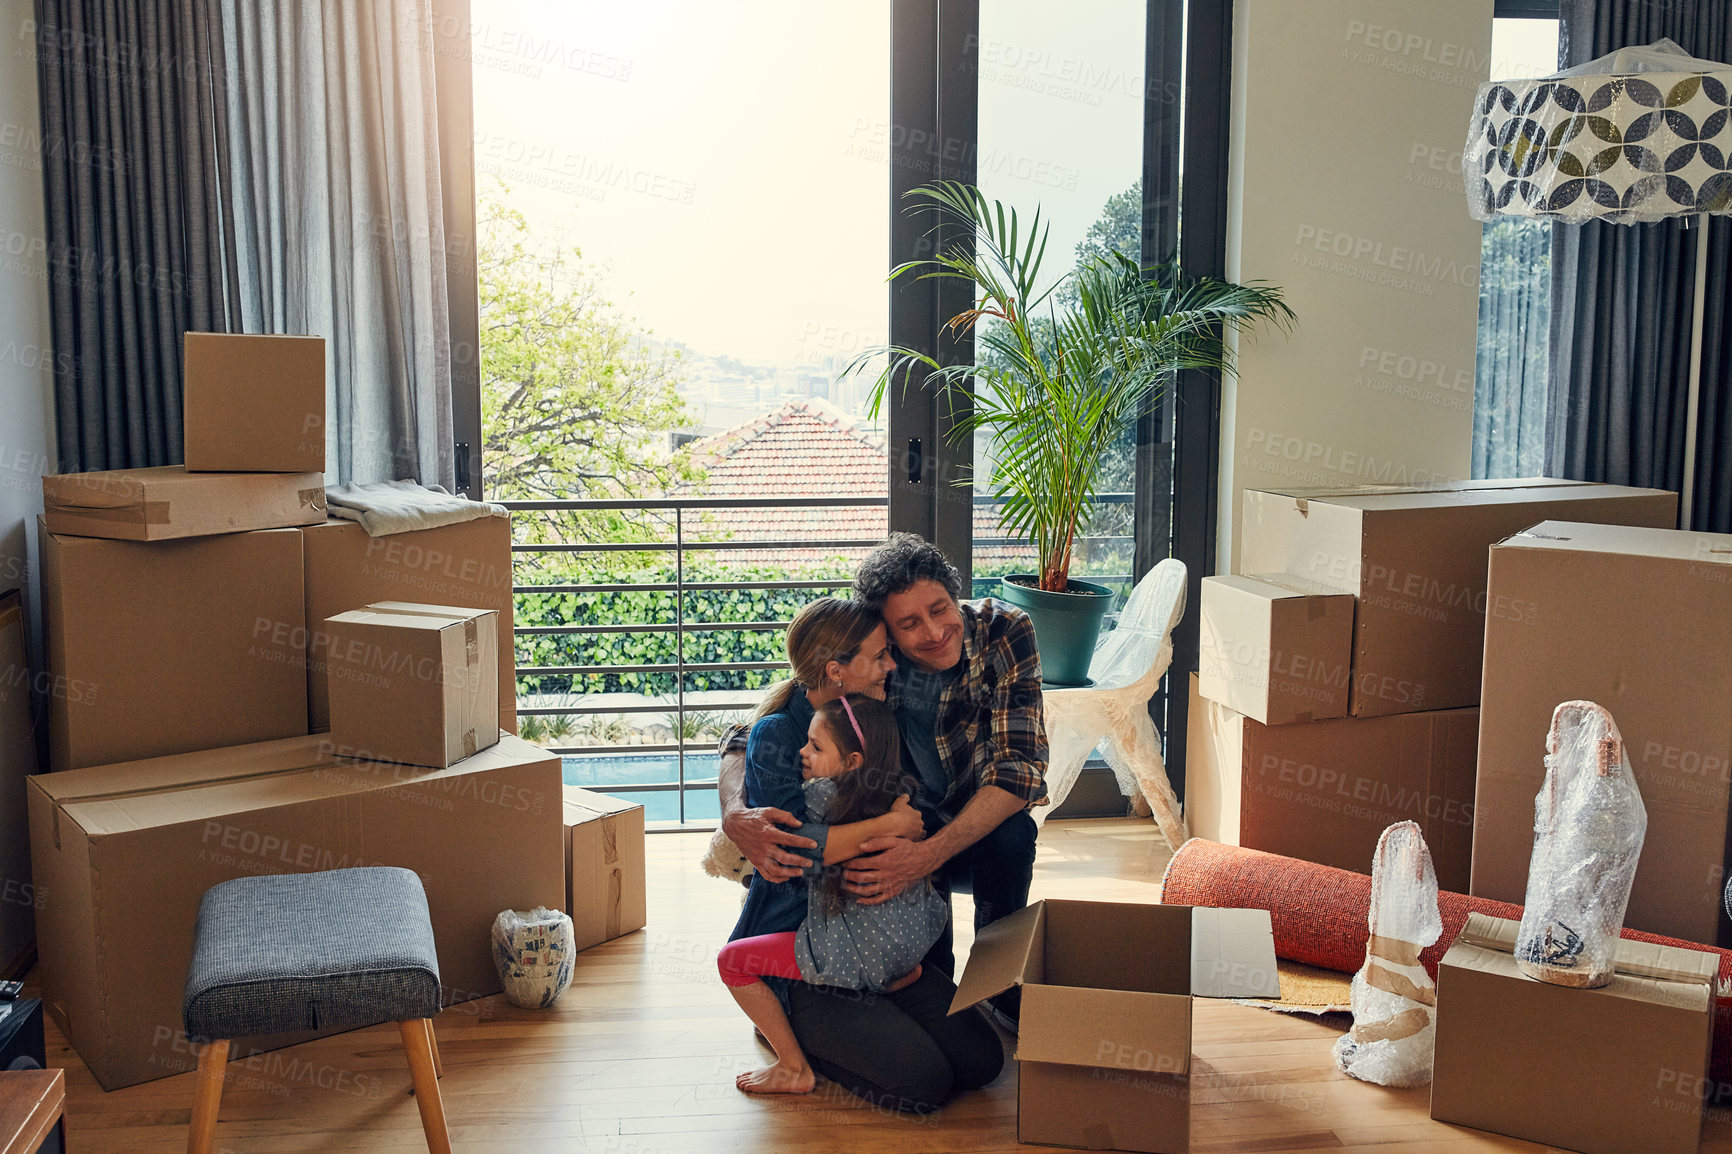 Buy stock photo Shot of a cheerful loving family packing out boxes together in their new home while giving each other a big hug during the day